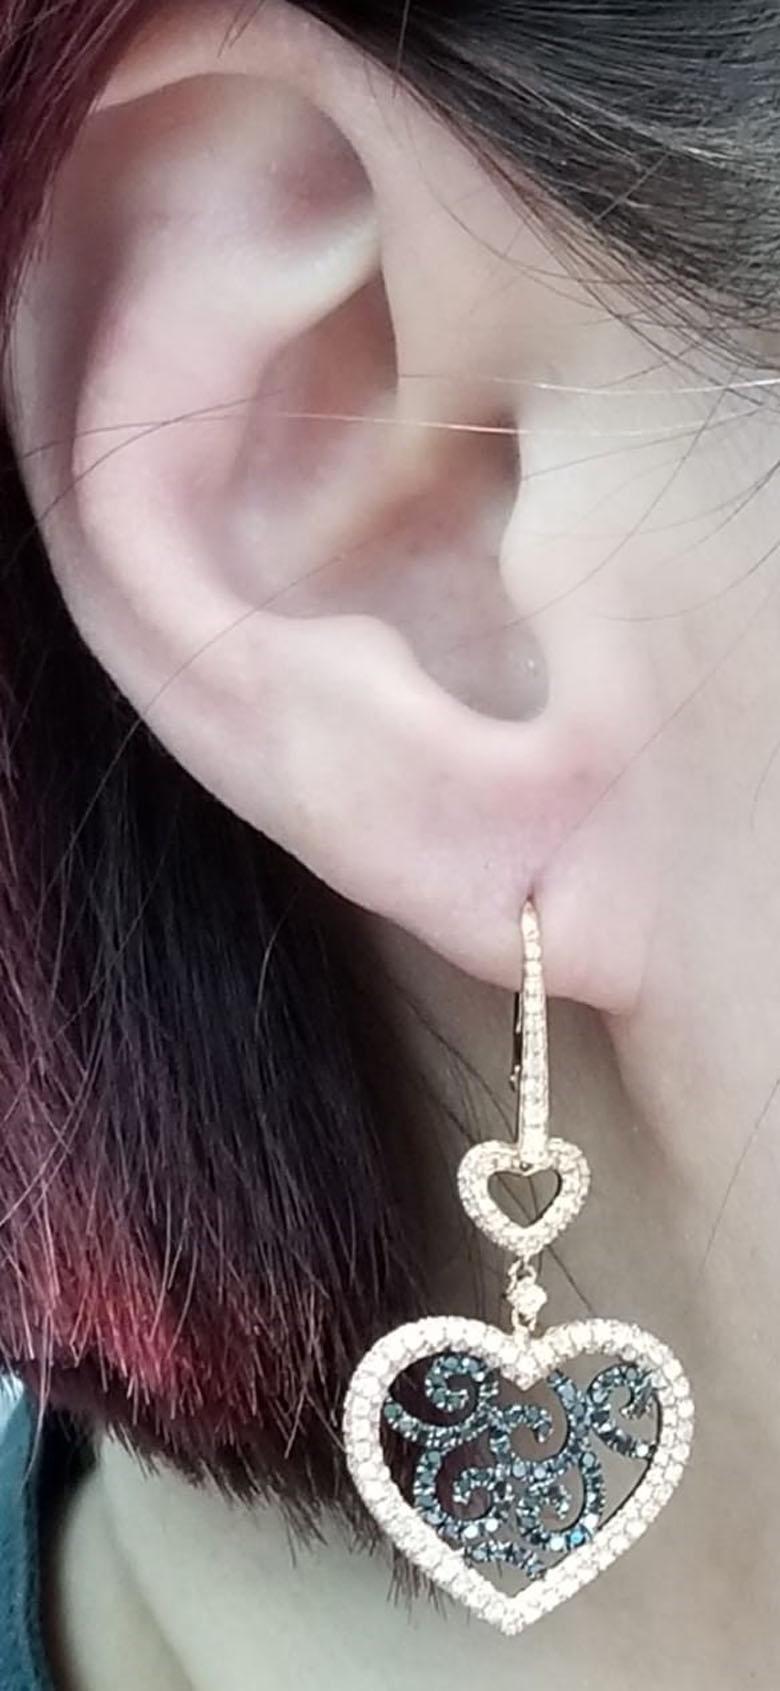 Introducing our stunning Art Deco 18k Rose Gold Heart Shape Dangle earrings, an exquisite piece that will add elegance and sophistication to any outfit. Crafted from the finest 18k rose gold, these earrings feature a heart shape design with a